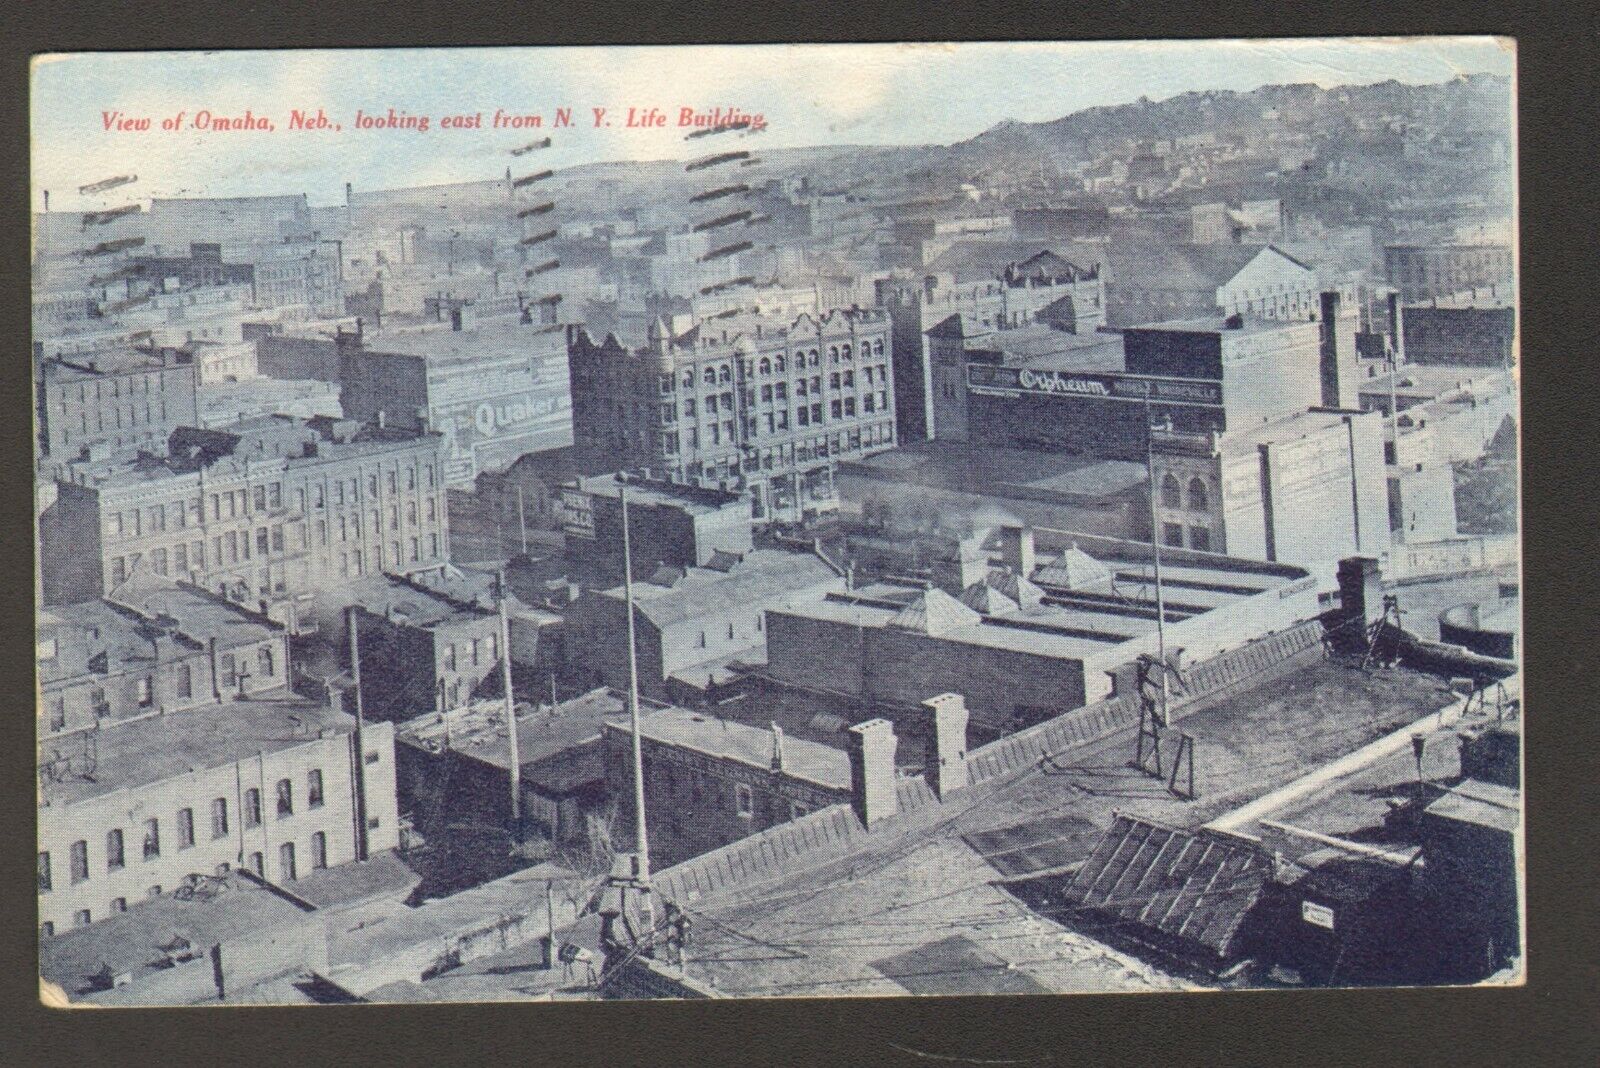 1908 Postmarked Postcard View of Omaha NE looking east from NY Life Building 